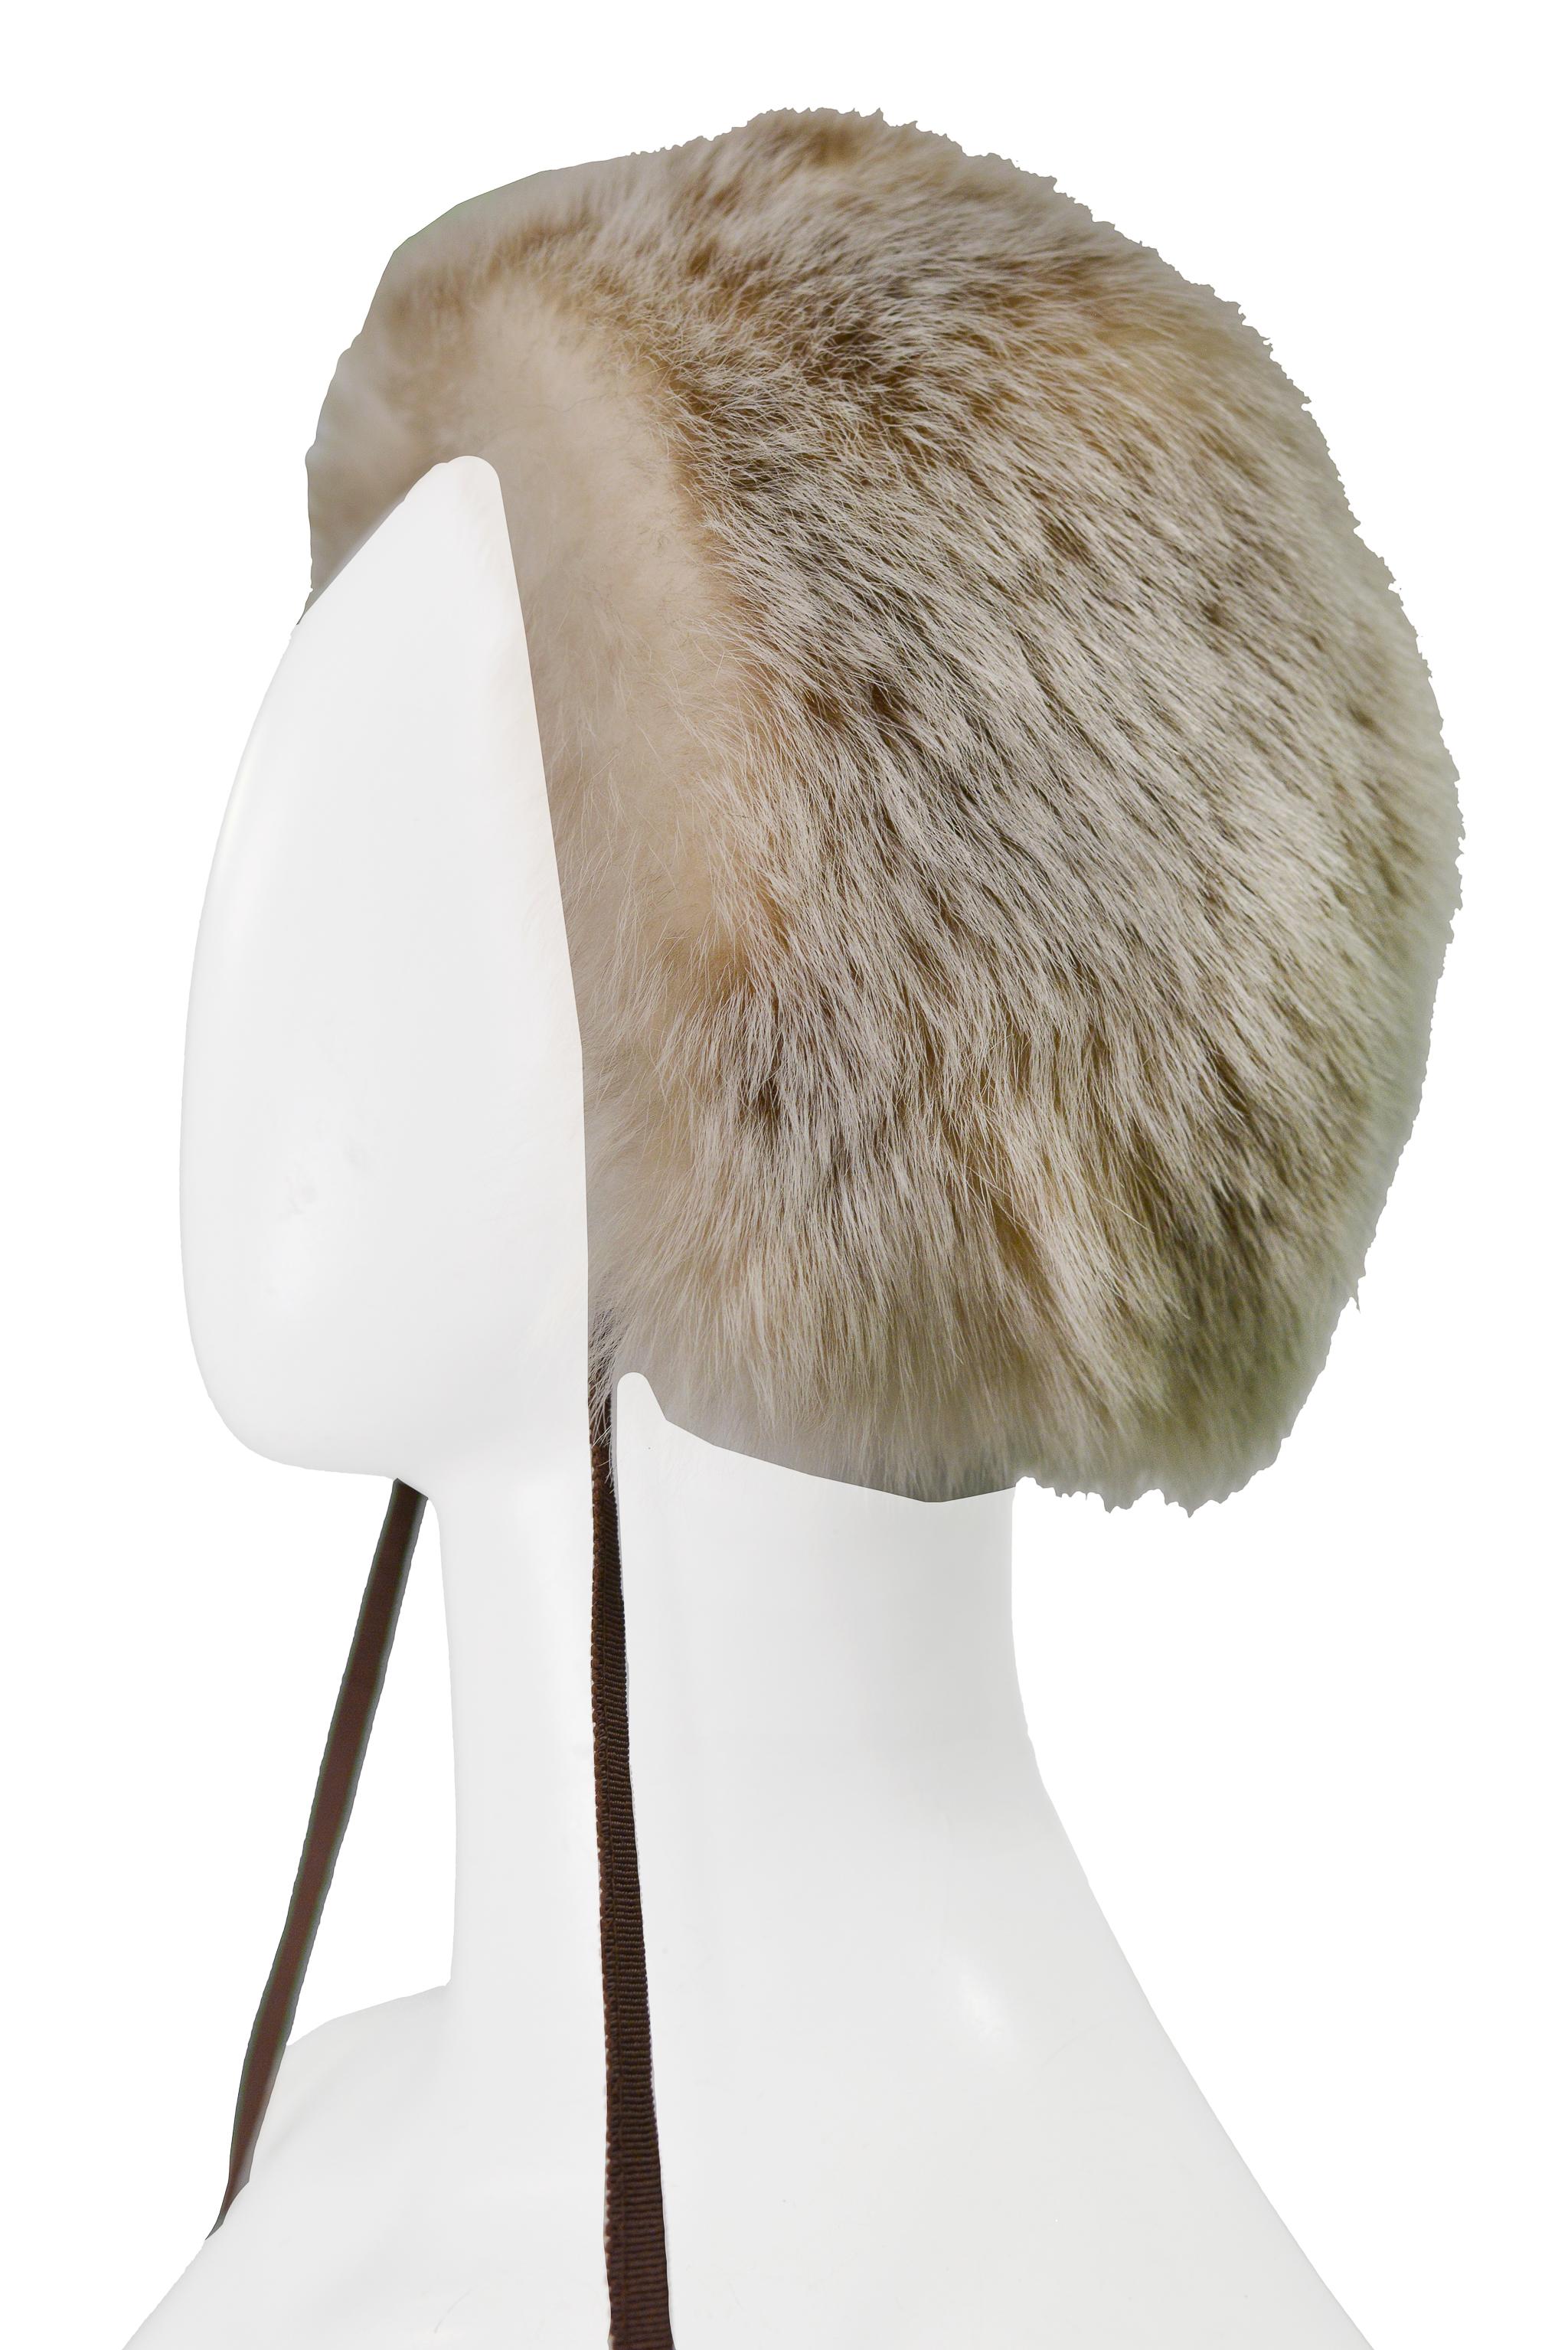 Yves Saint Laurent YSL Fur Pom Pom Hat In Good Condition For Sale In Los Angeles, CA